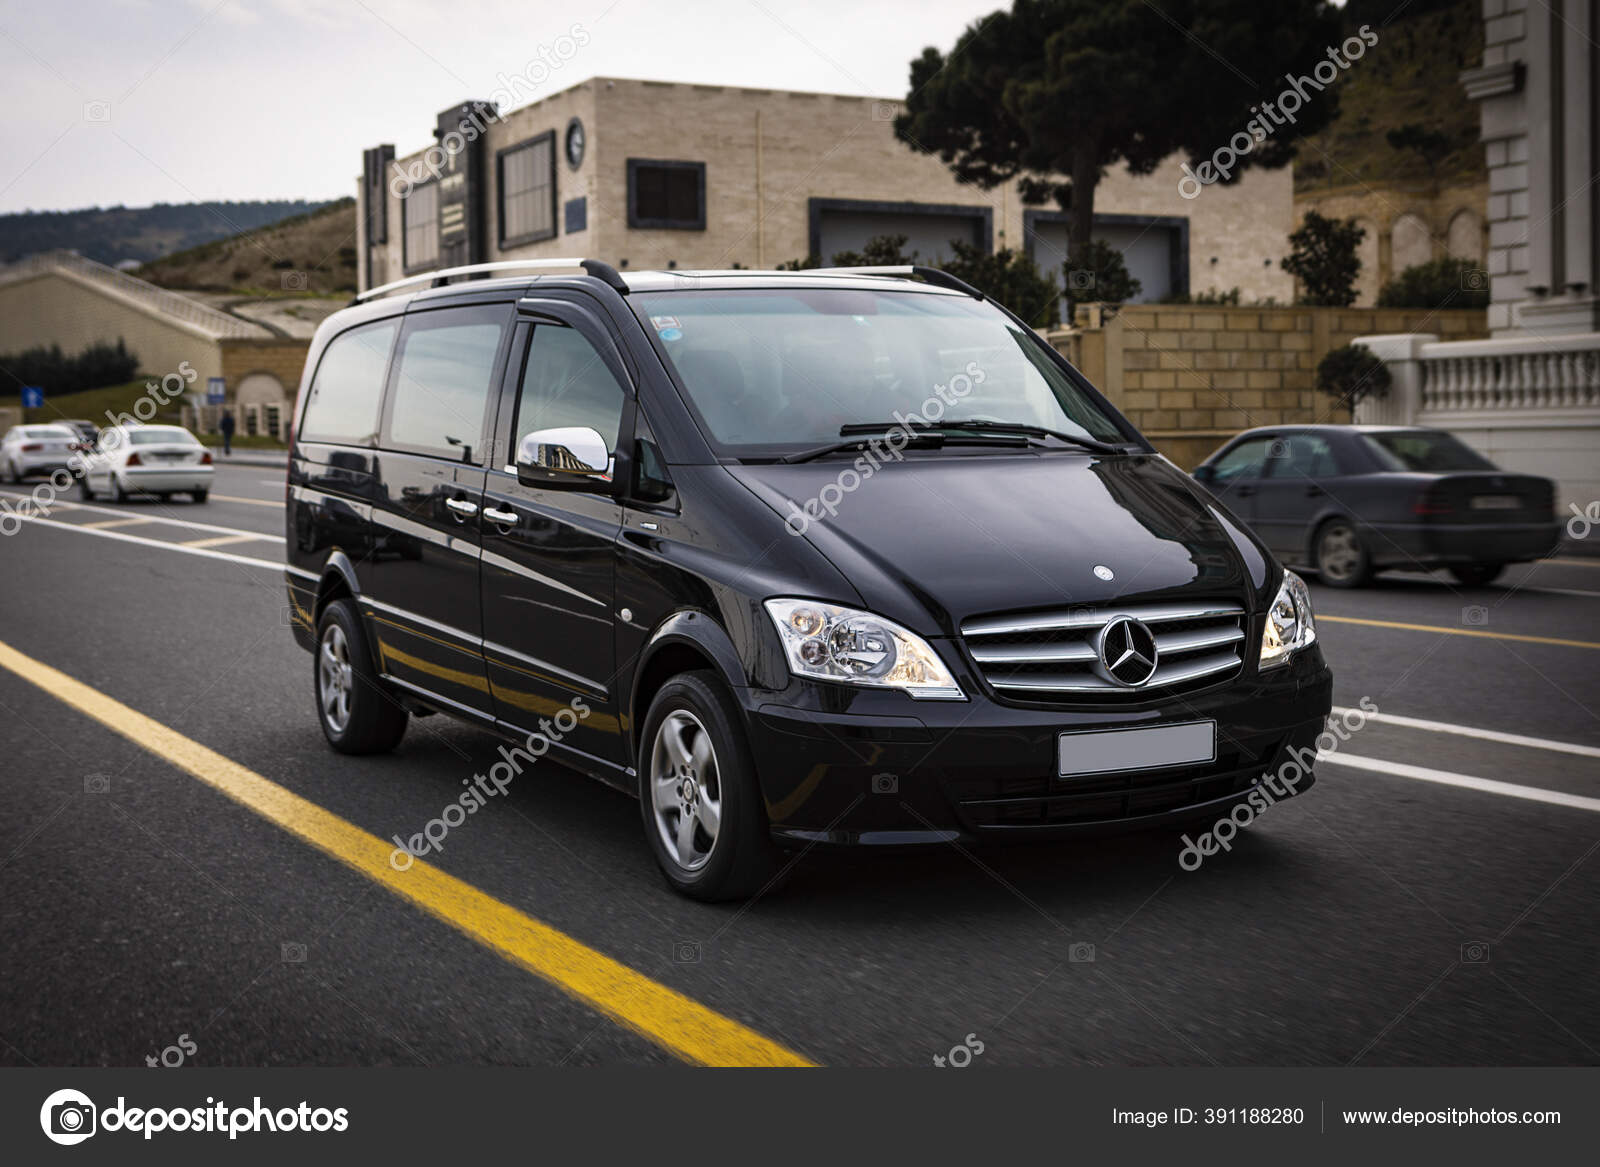 Mercedes Vito 9seater features and prices of the most capable Vito